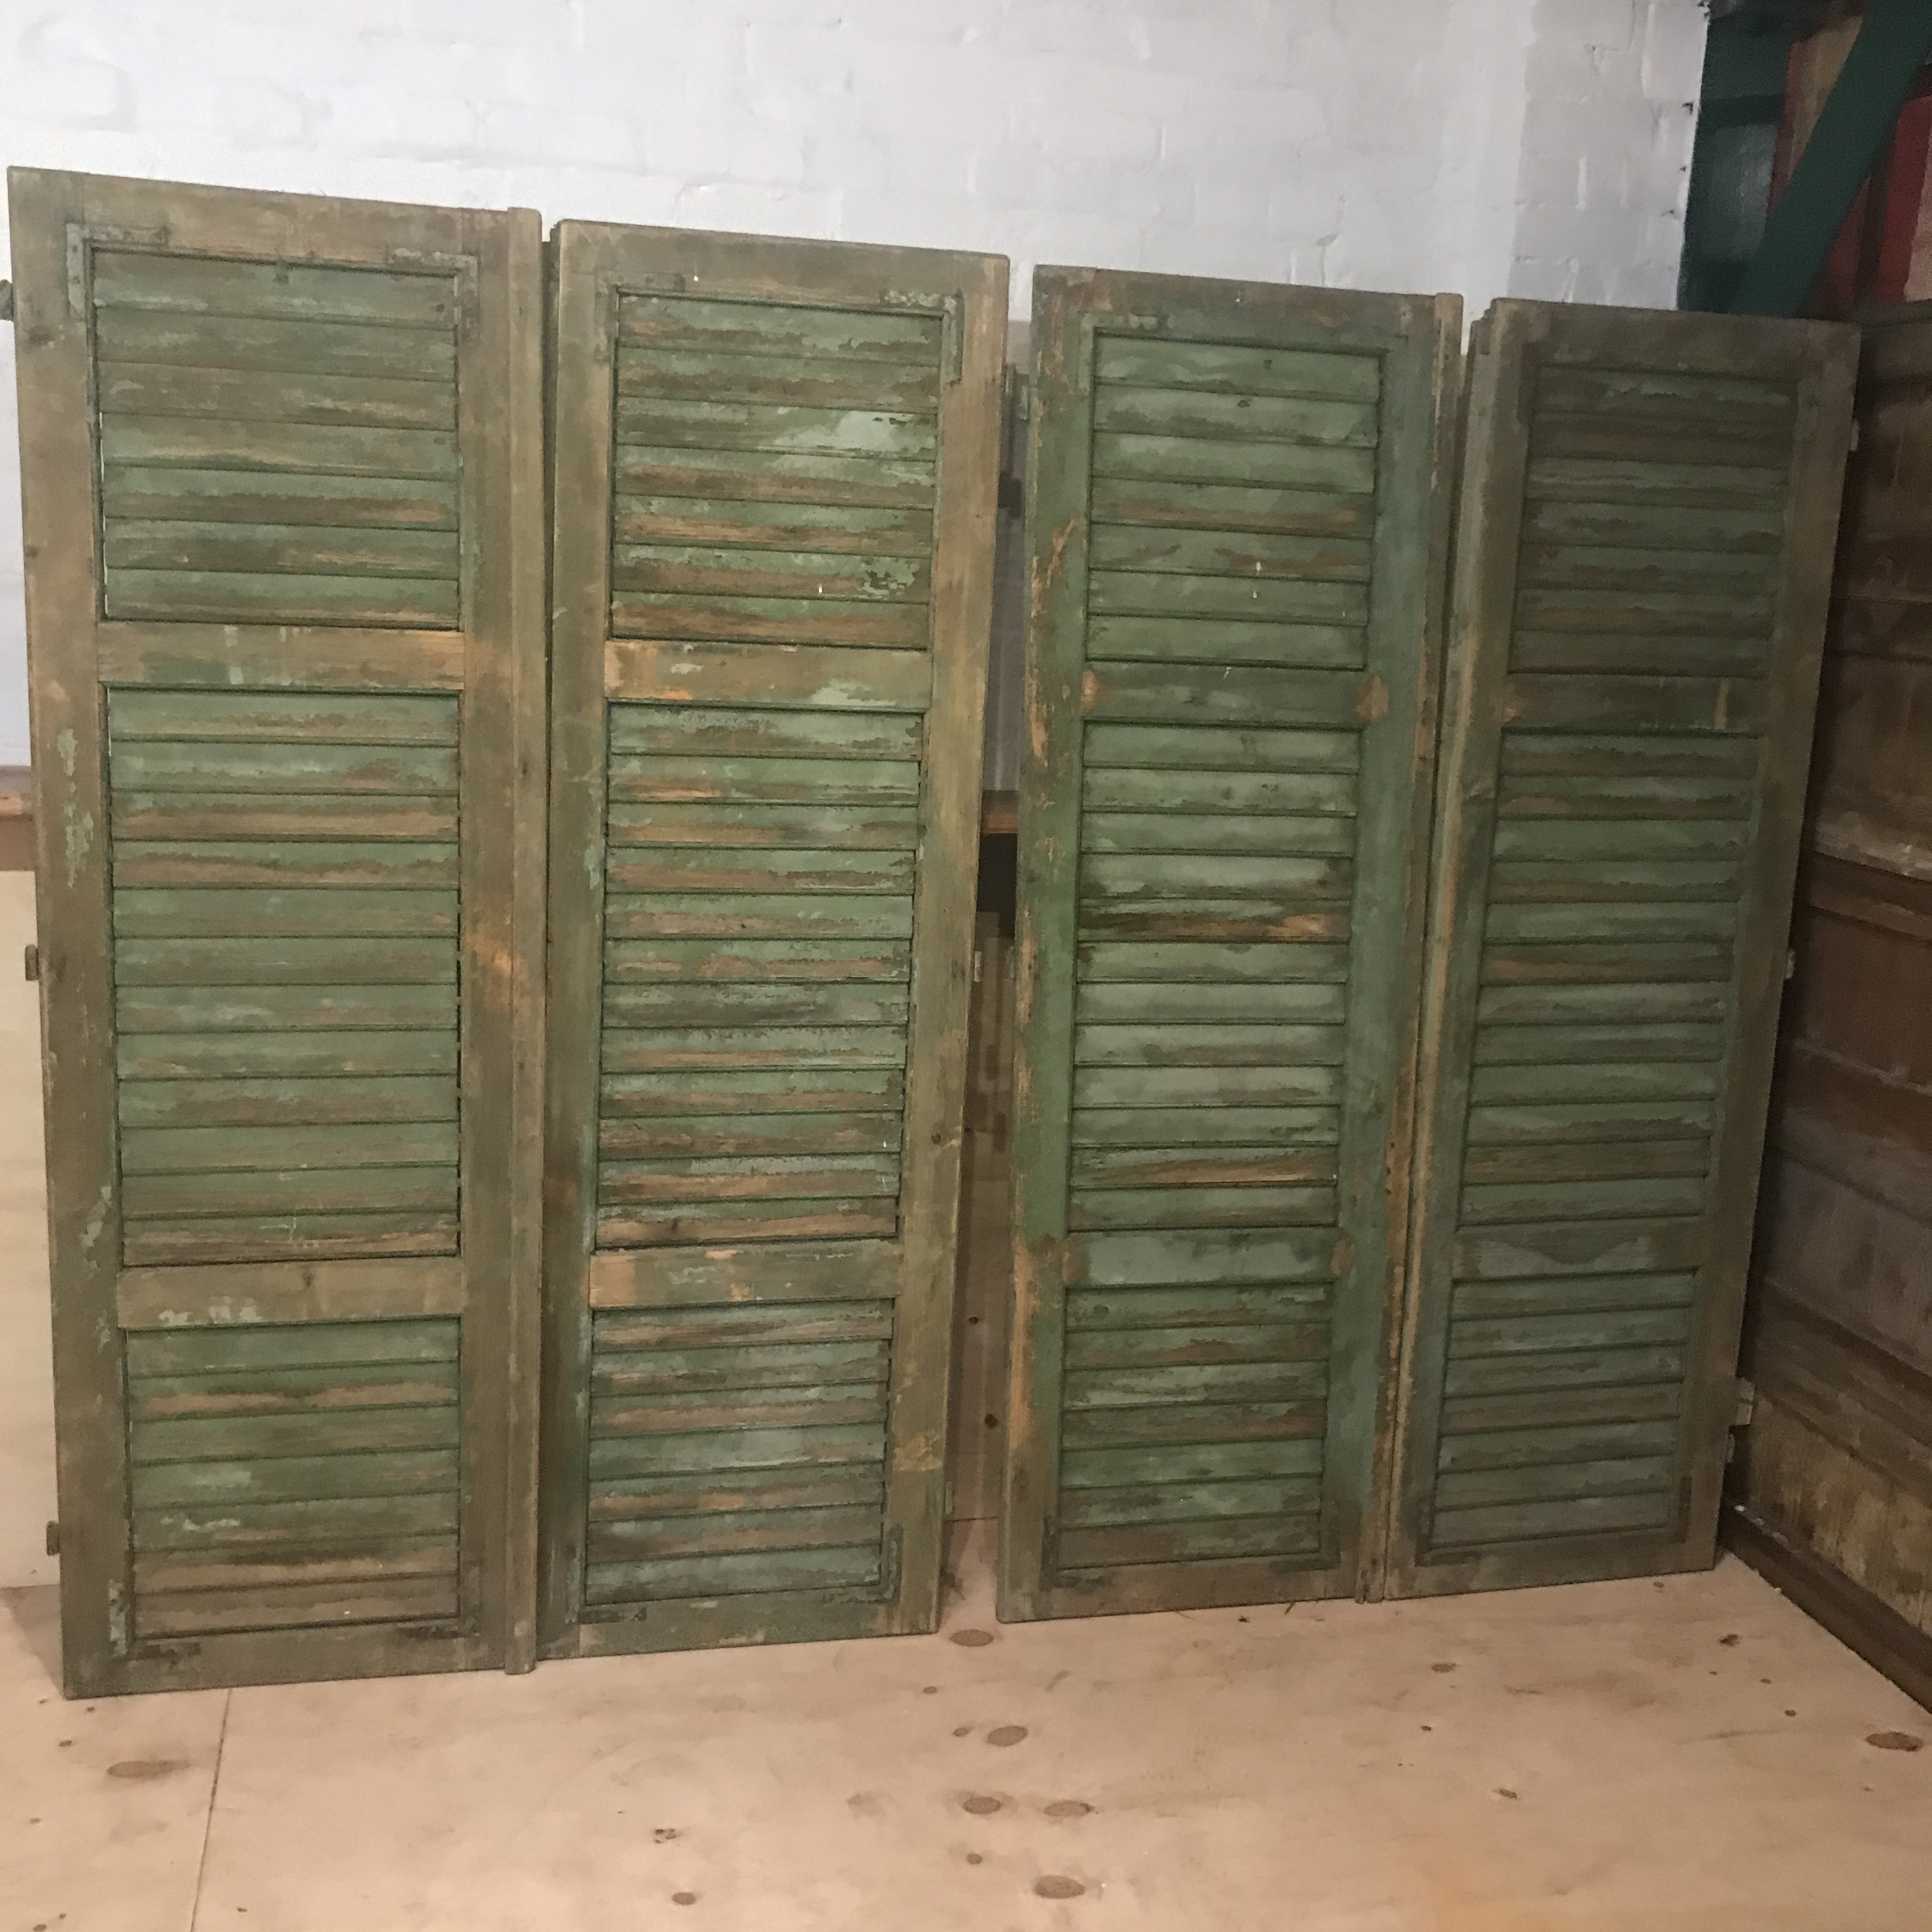 TWO PAIRS OF FRENCH ANTIQUE SHUTTERS IN THE ORIGINAL PAINT